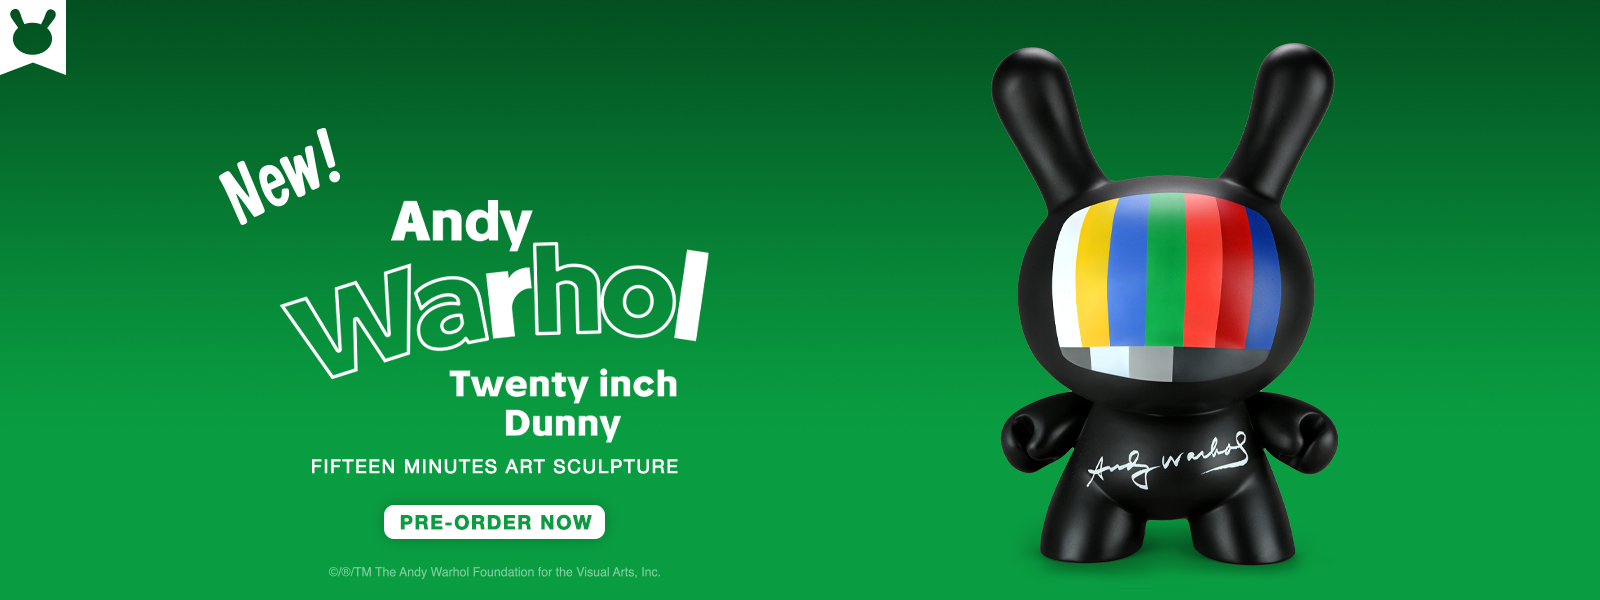 Super limited Andy Warhol “Fifteen Minutes” 20-inch Dunny drops today